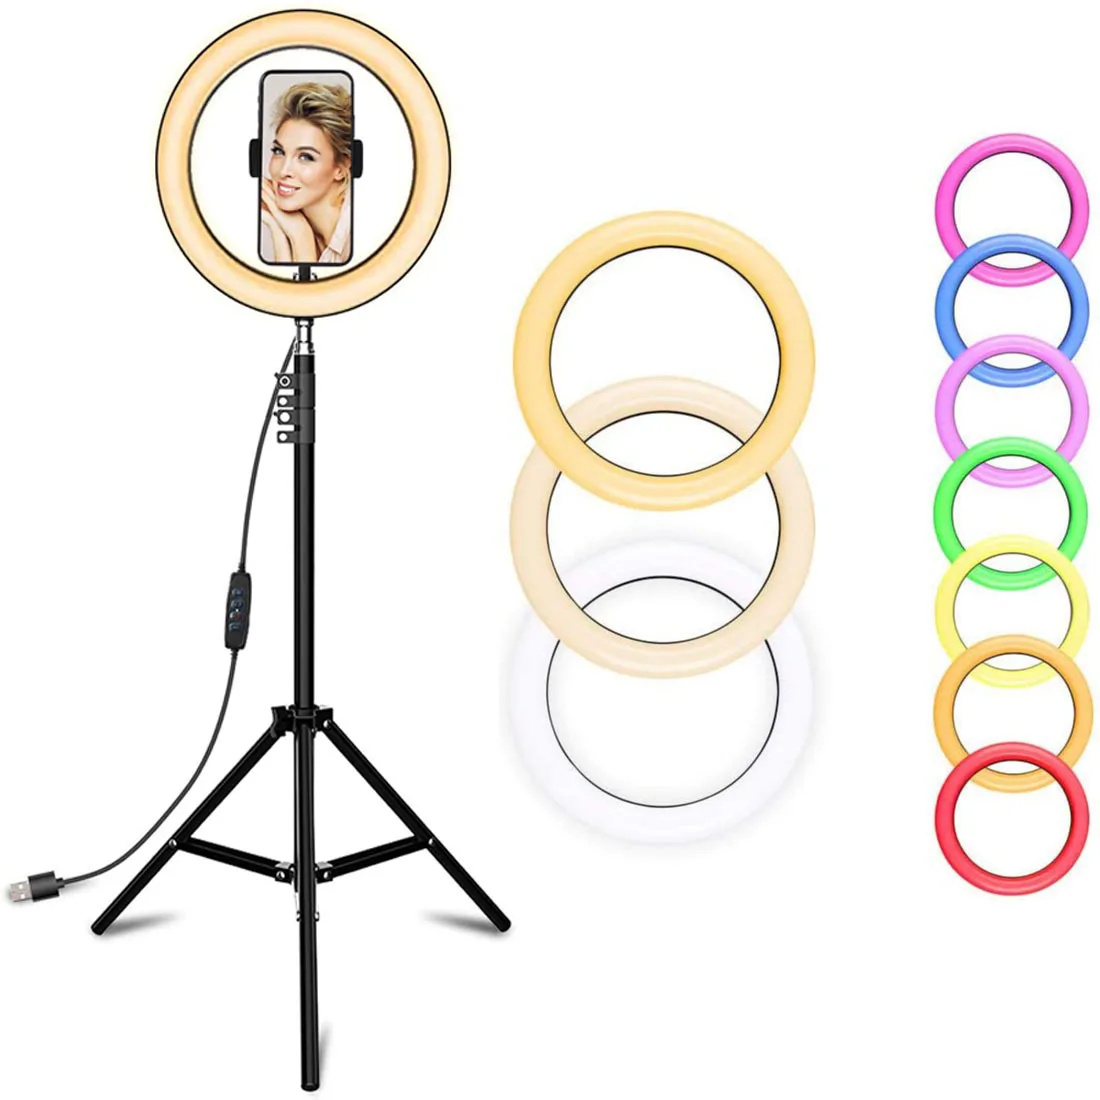 CPYP 14 inch MJ36 RGB soft ring light Circle Photography Lighting 16 colour Led RGB Ring Light with Phone Tripod Stand